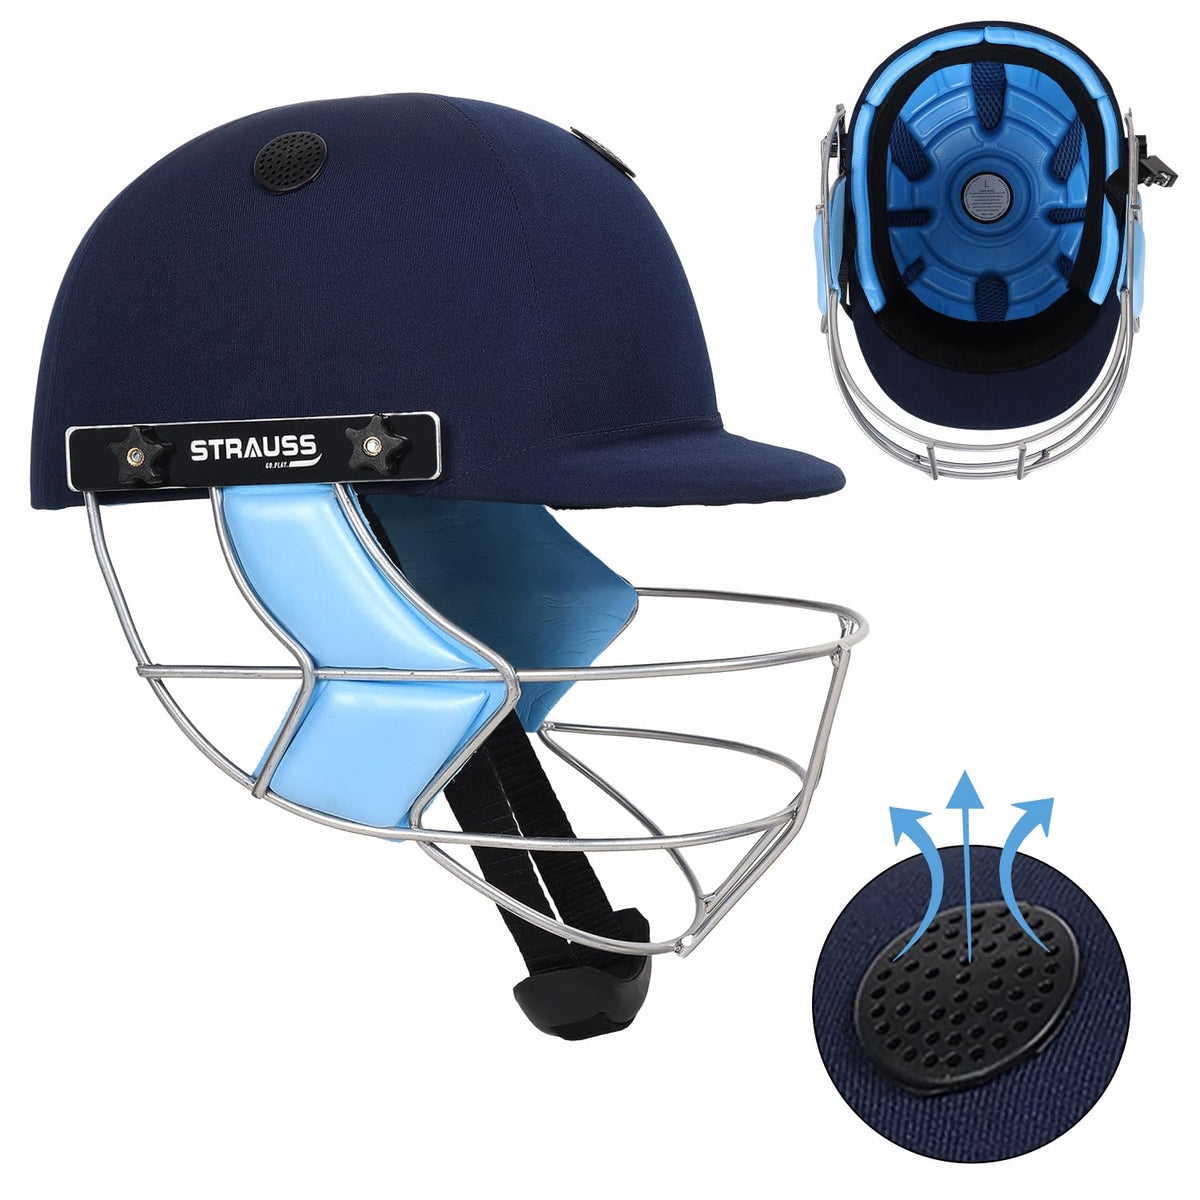 Strauss Cricket Helmet | Steel Grill | Edition: Middle Order | Size: Large | Age: 15+yrs | Color: Blue | for Men, Women | Lightweight | Advance Protection | Leather Ball Cricket Helmet